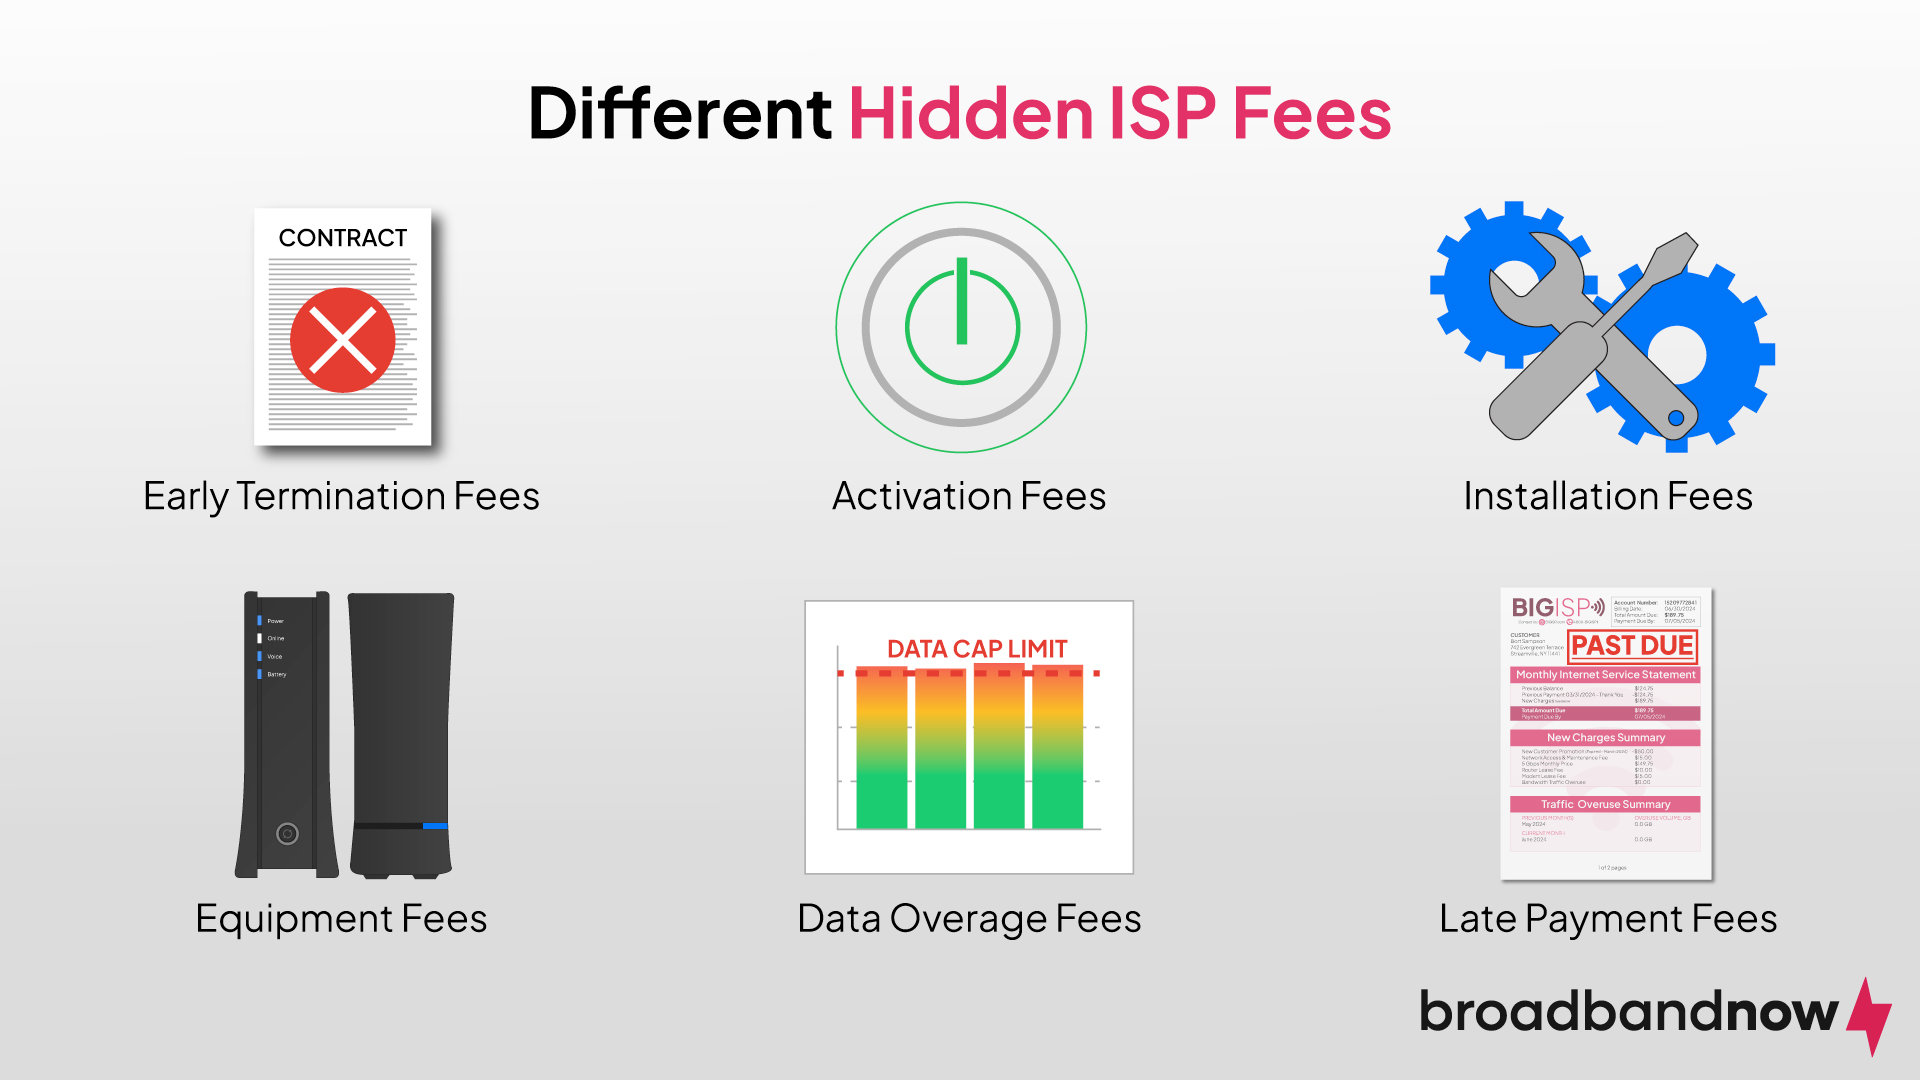 A graphic design image of various icons depicting the different hidden ISP fees.